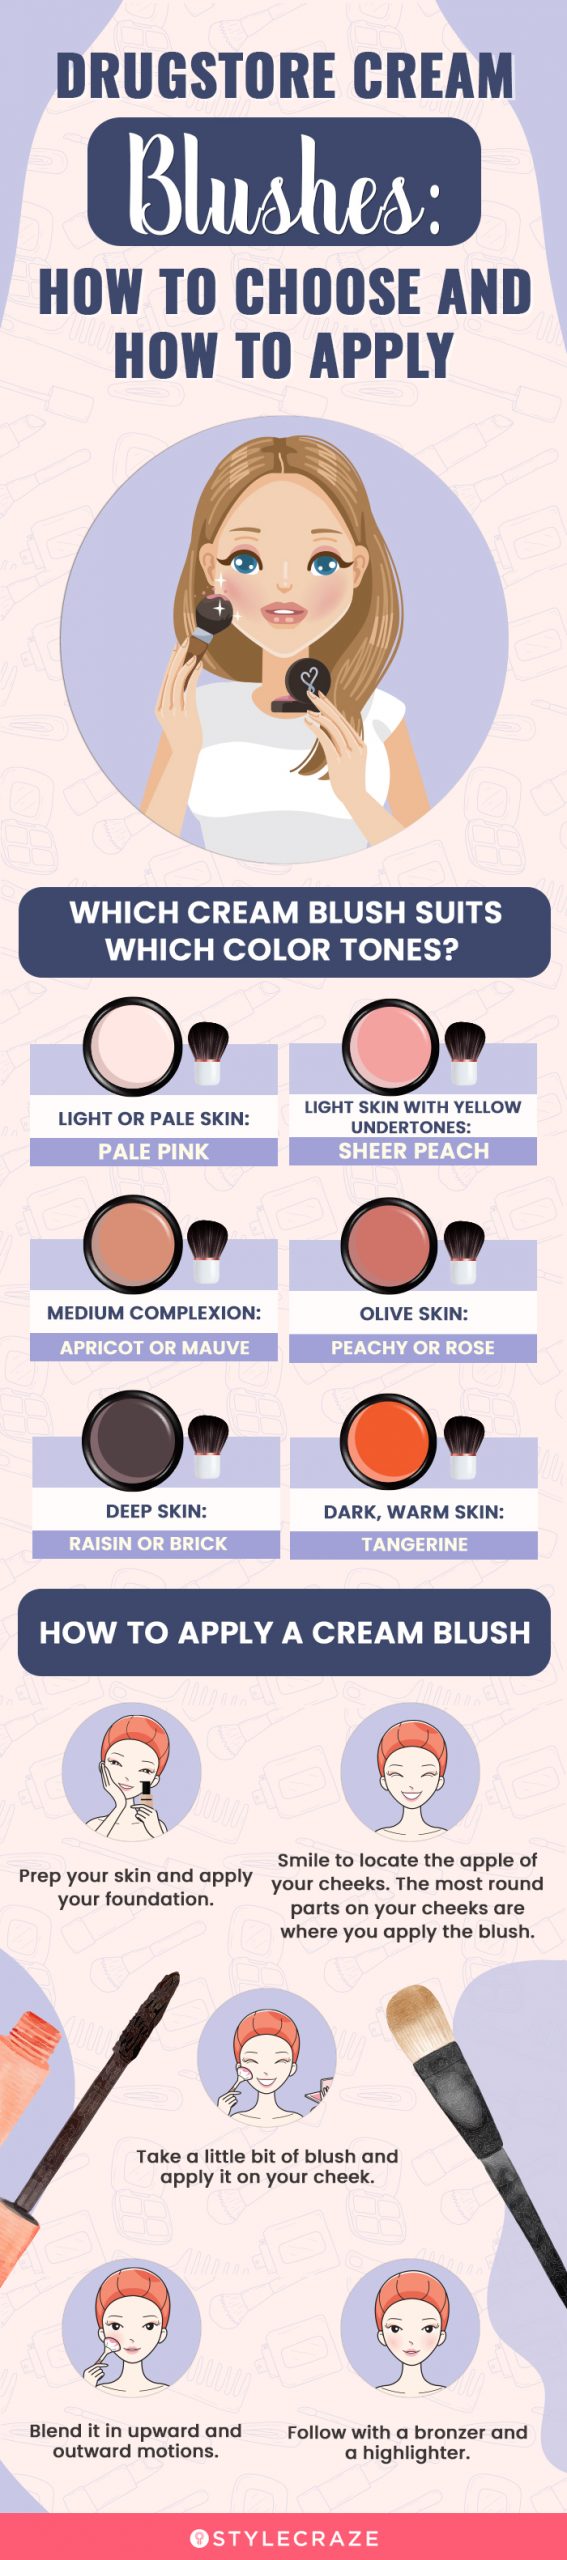 Drugstore Cream Blushes: How To Choose & How To Apply [infographic]